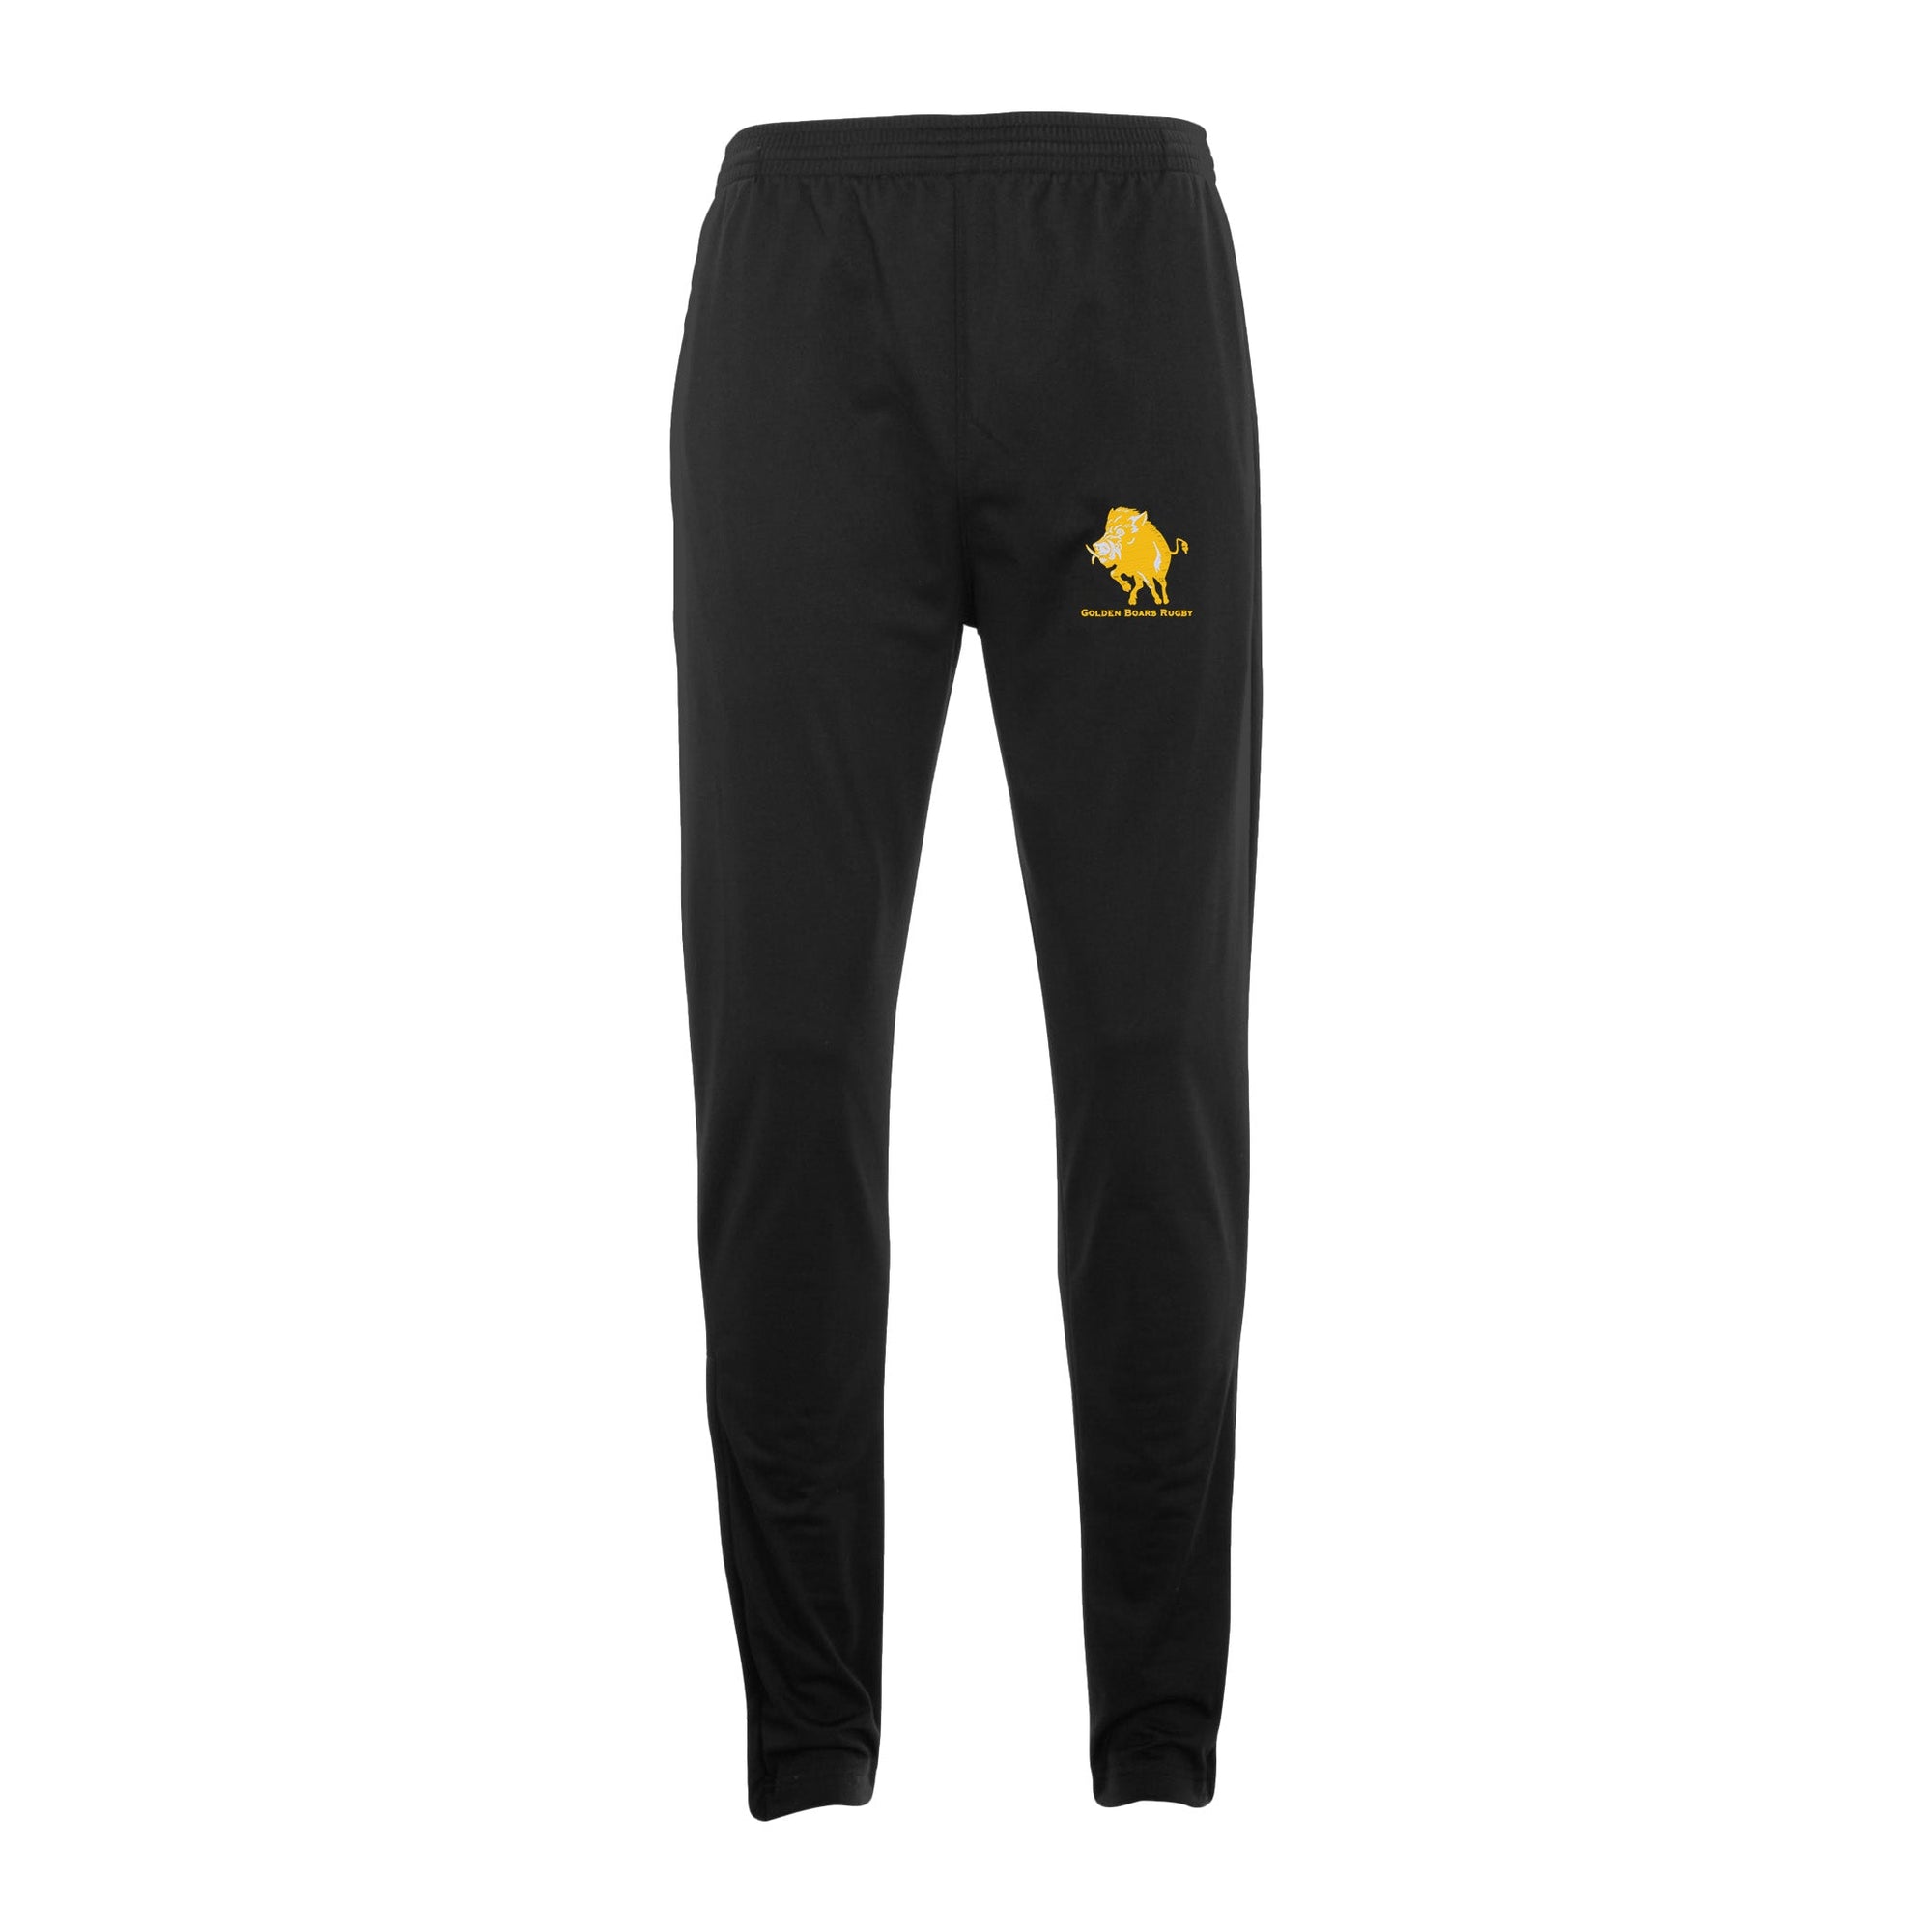 Rugby Imports Golden Boars RFC Unisex Tapered Leg Pant